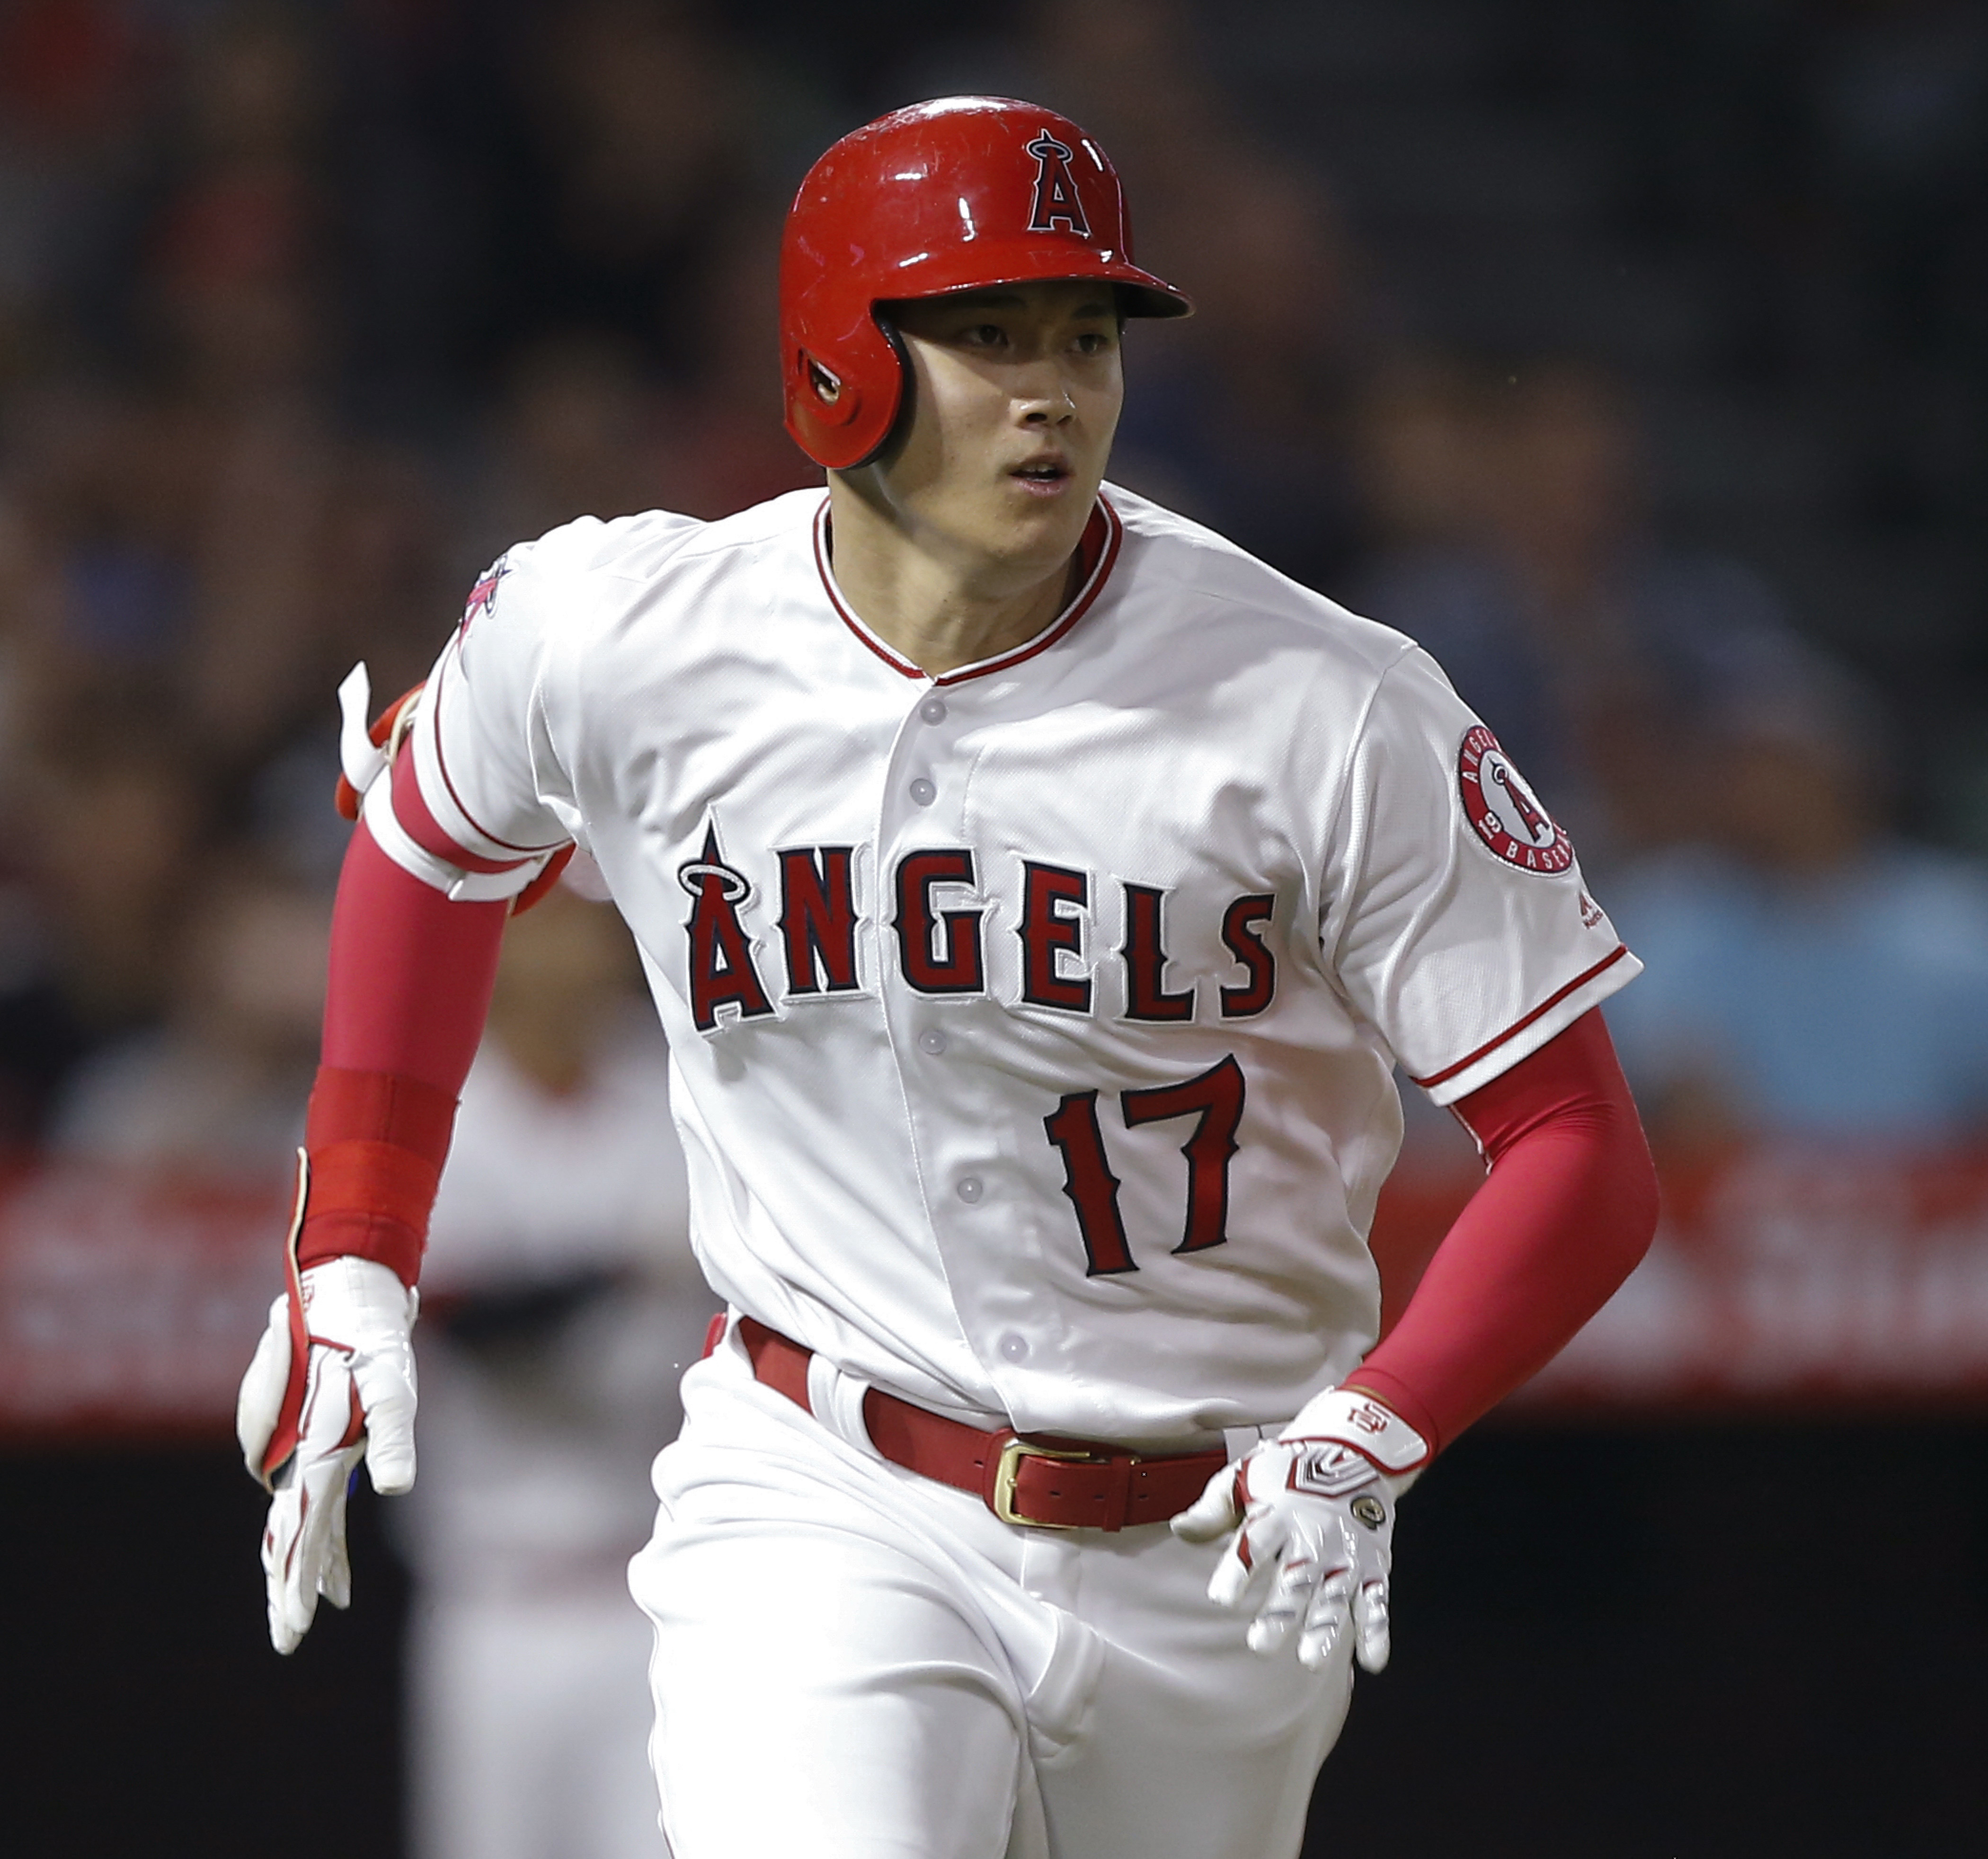 Ohtani still slugging in the final days of a remarkable year